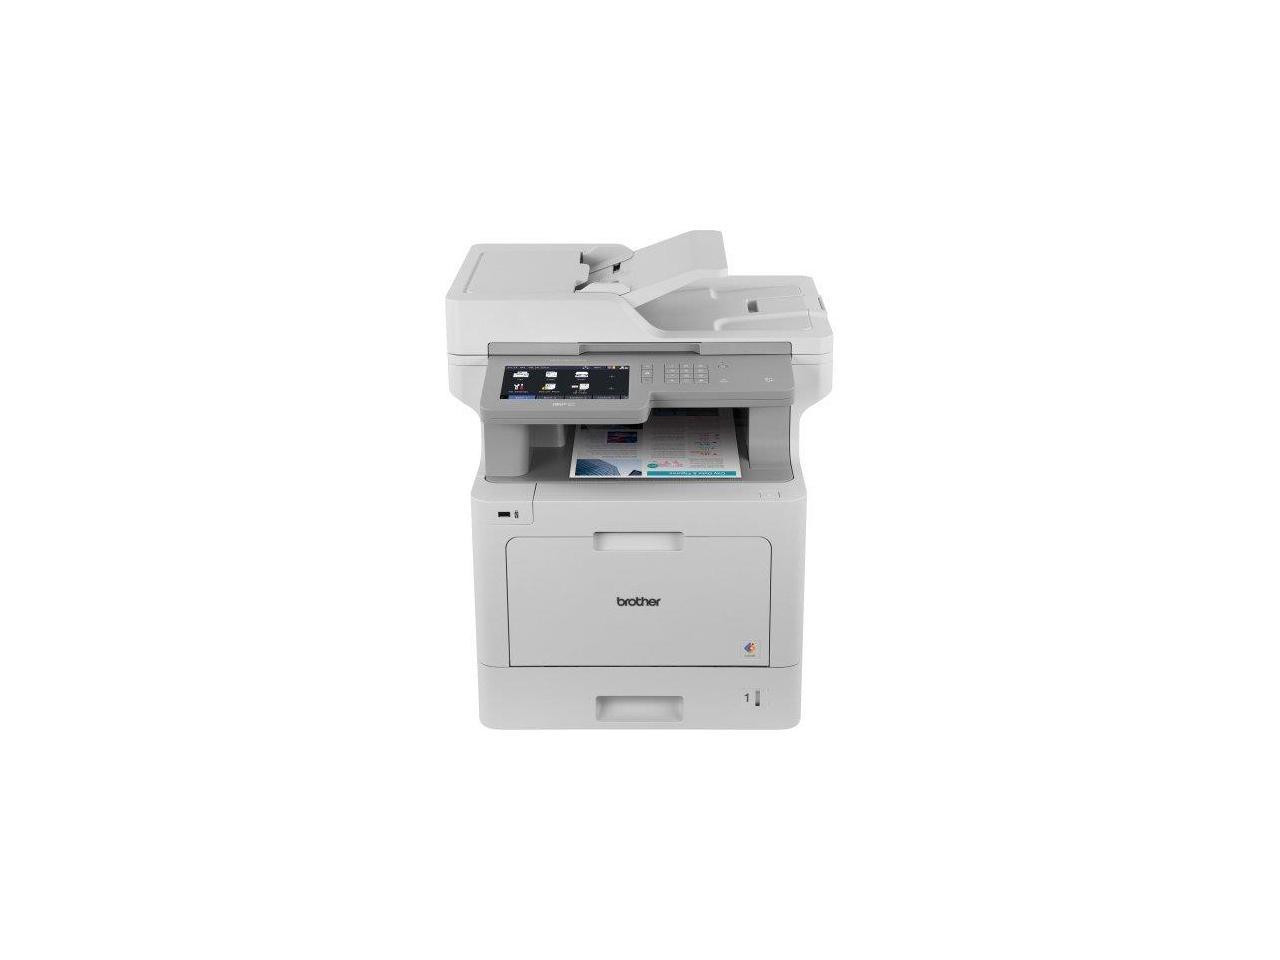 Brother Business Color Laser All-in-One MFC-L9570CDW - Duplex Printing - Wireless LAN - Copier/Fax/Printer/Scanner - 33 ppm Mono/33 ppm Color - 2400 x 600 dpi Print - 7" LCD Touchscreen - Gigabit